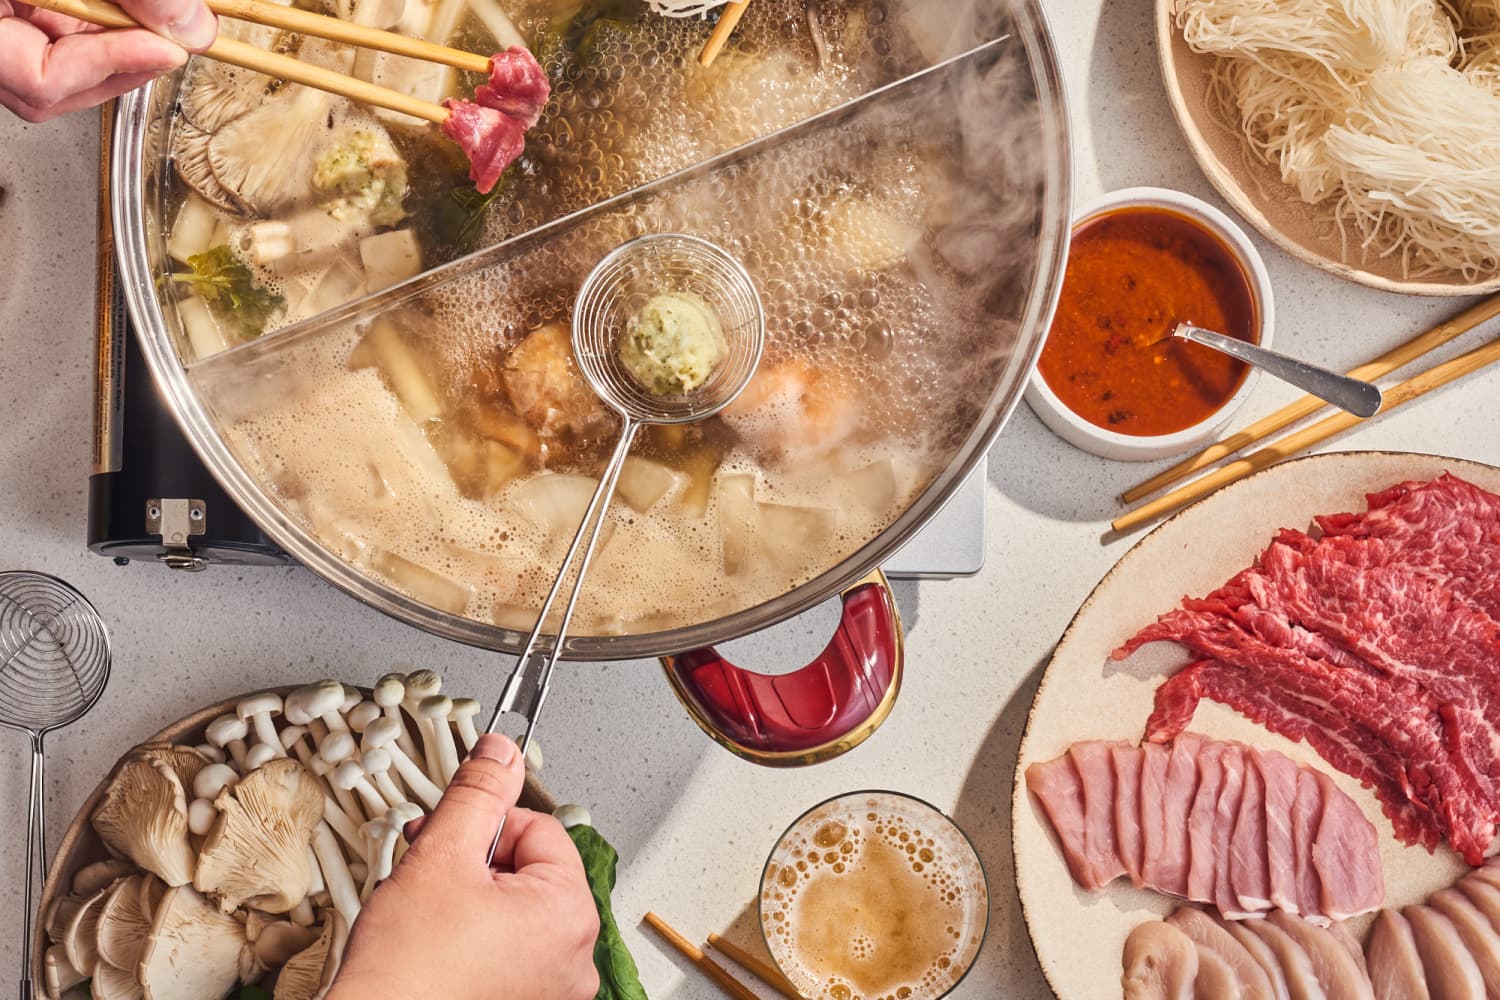 Fun, Festive, and Low-Stress: Why Everyone Needs to Hot Pot This Fall